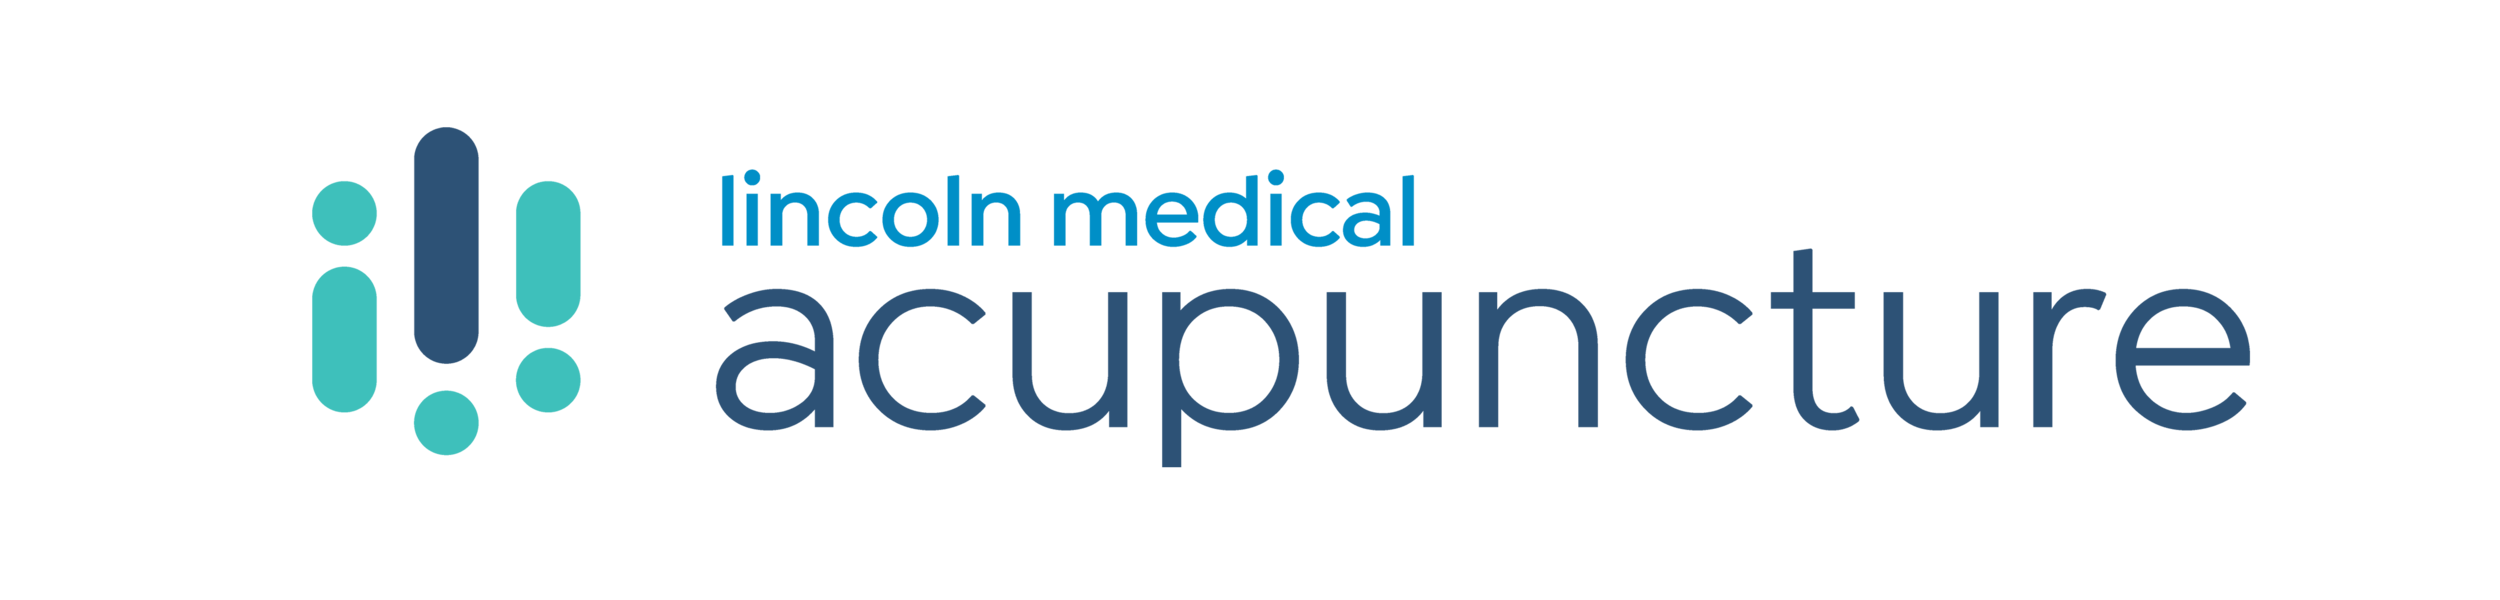 Lincoln Medical Acupuncture